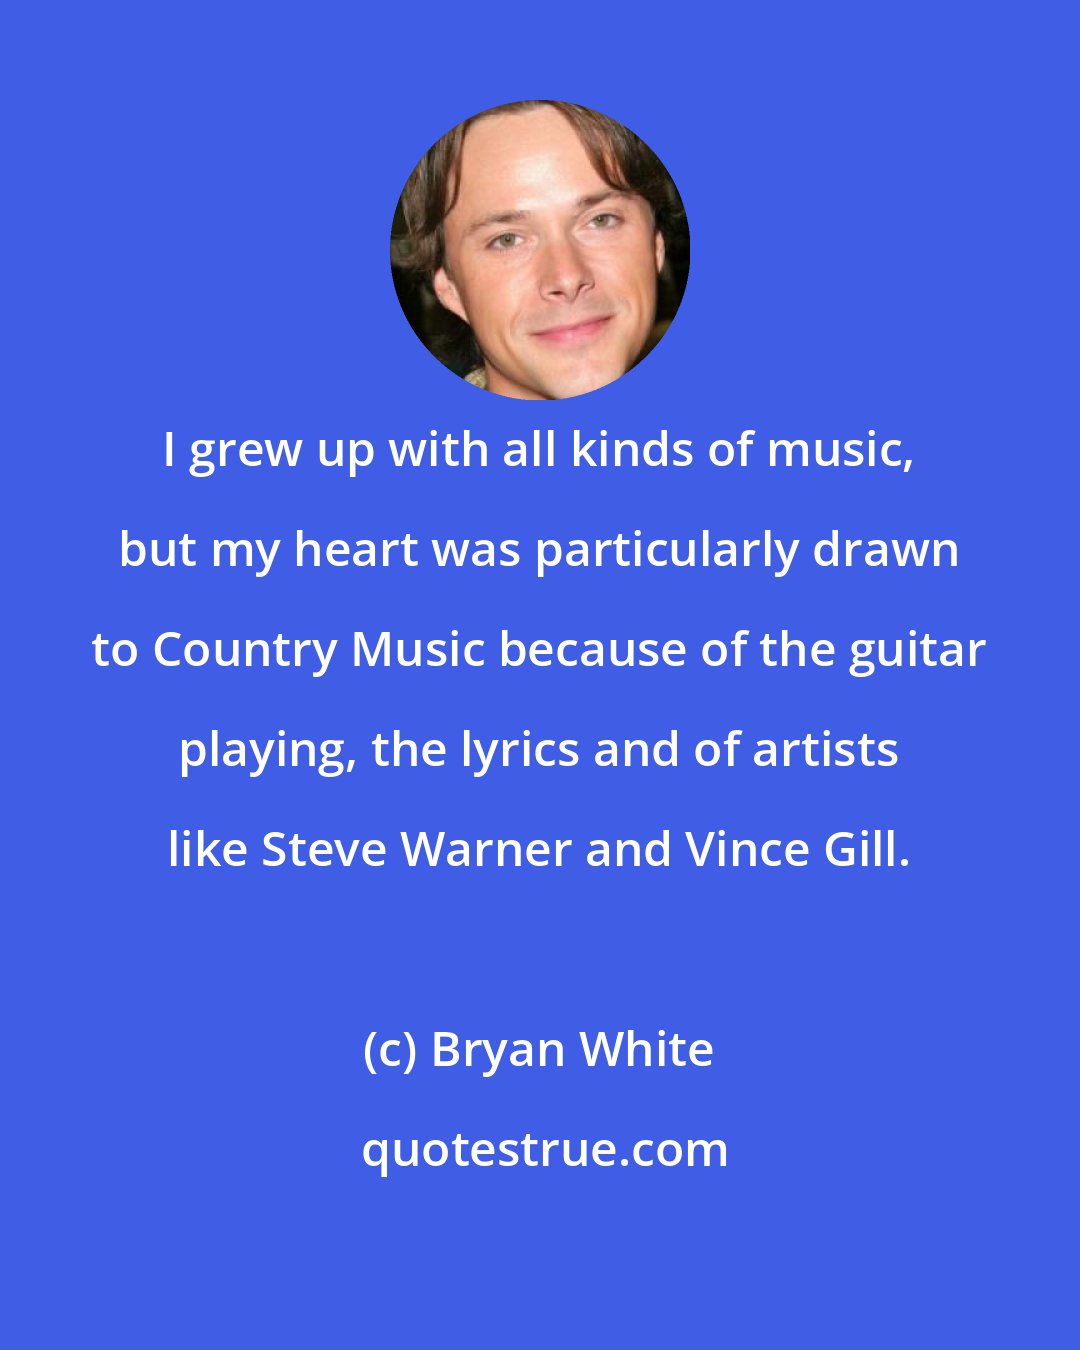 Bryan White: I grew up with all kinds of music, but my heart was particularly drawn to Country Music because of the guitar playing, the lyrics and of artists like Steve Warner and Vince Gill.